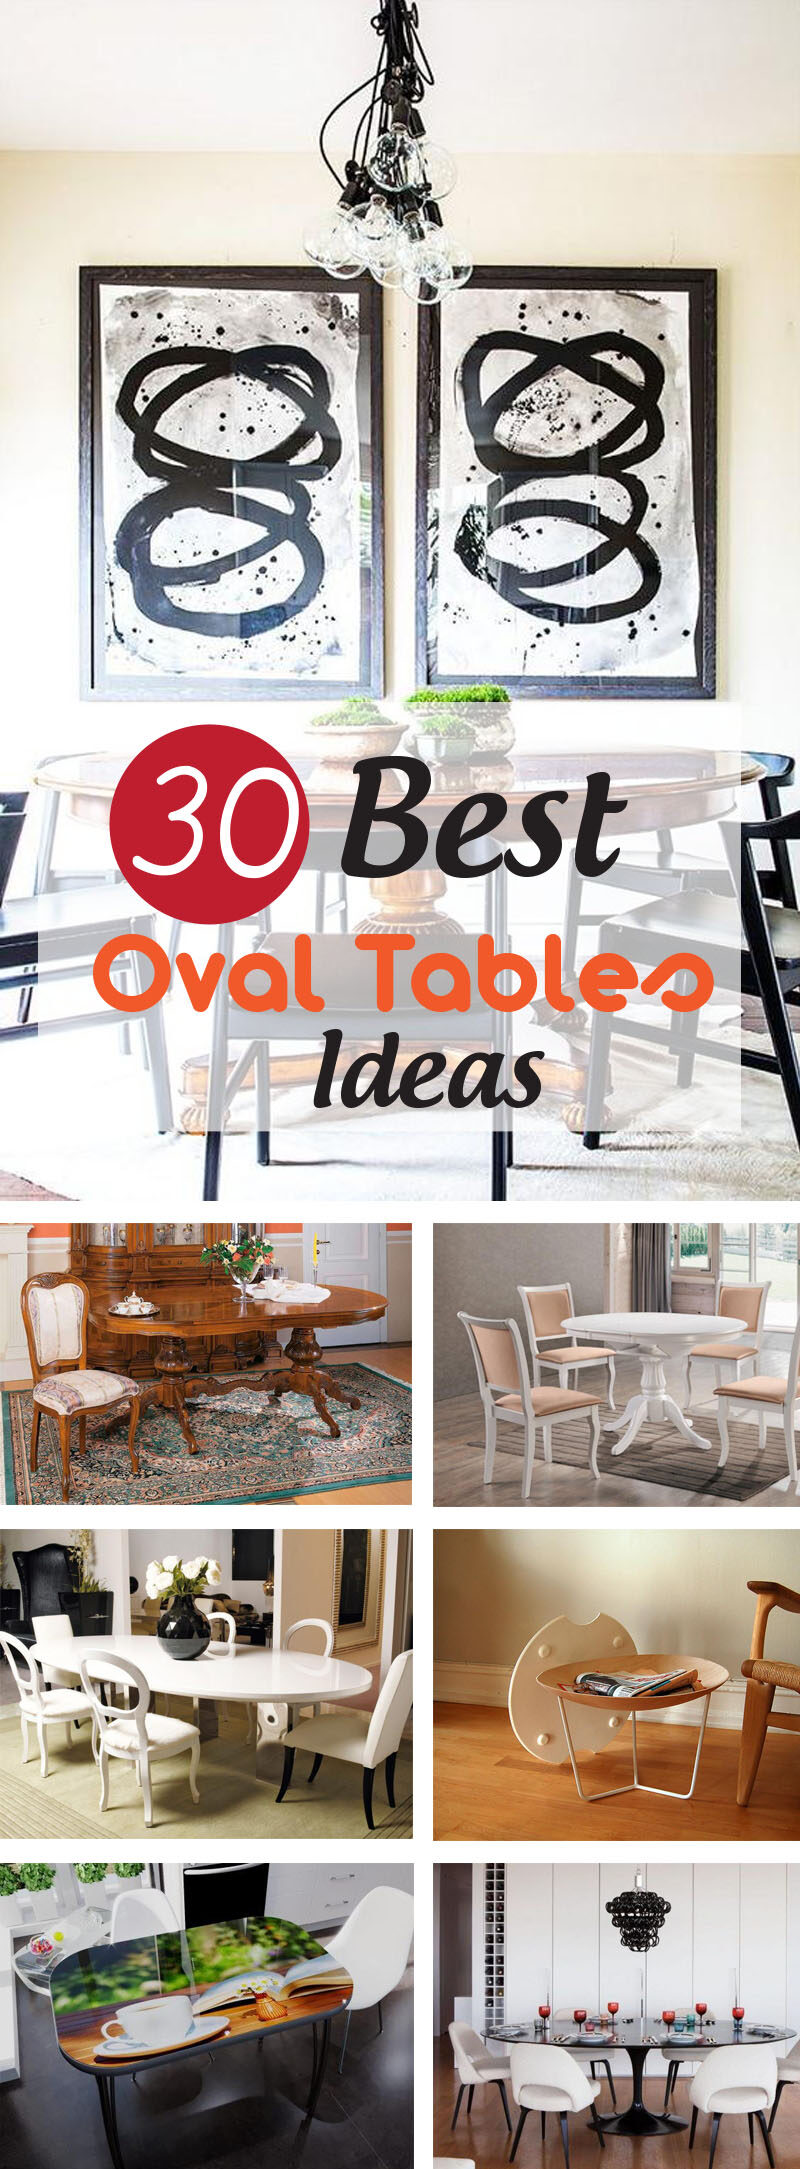 Best Oval Tables Ideas